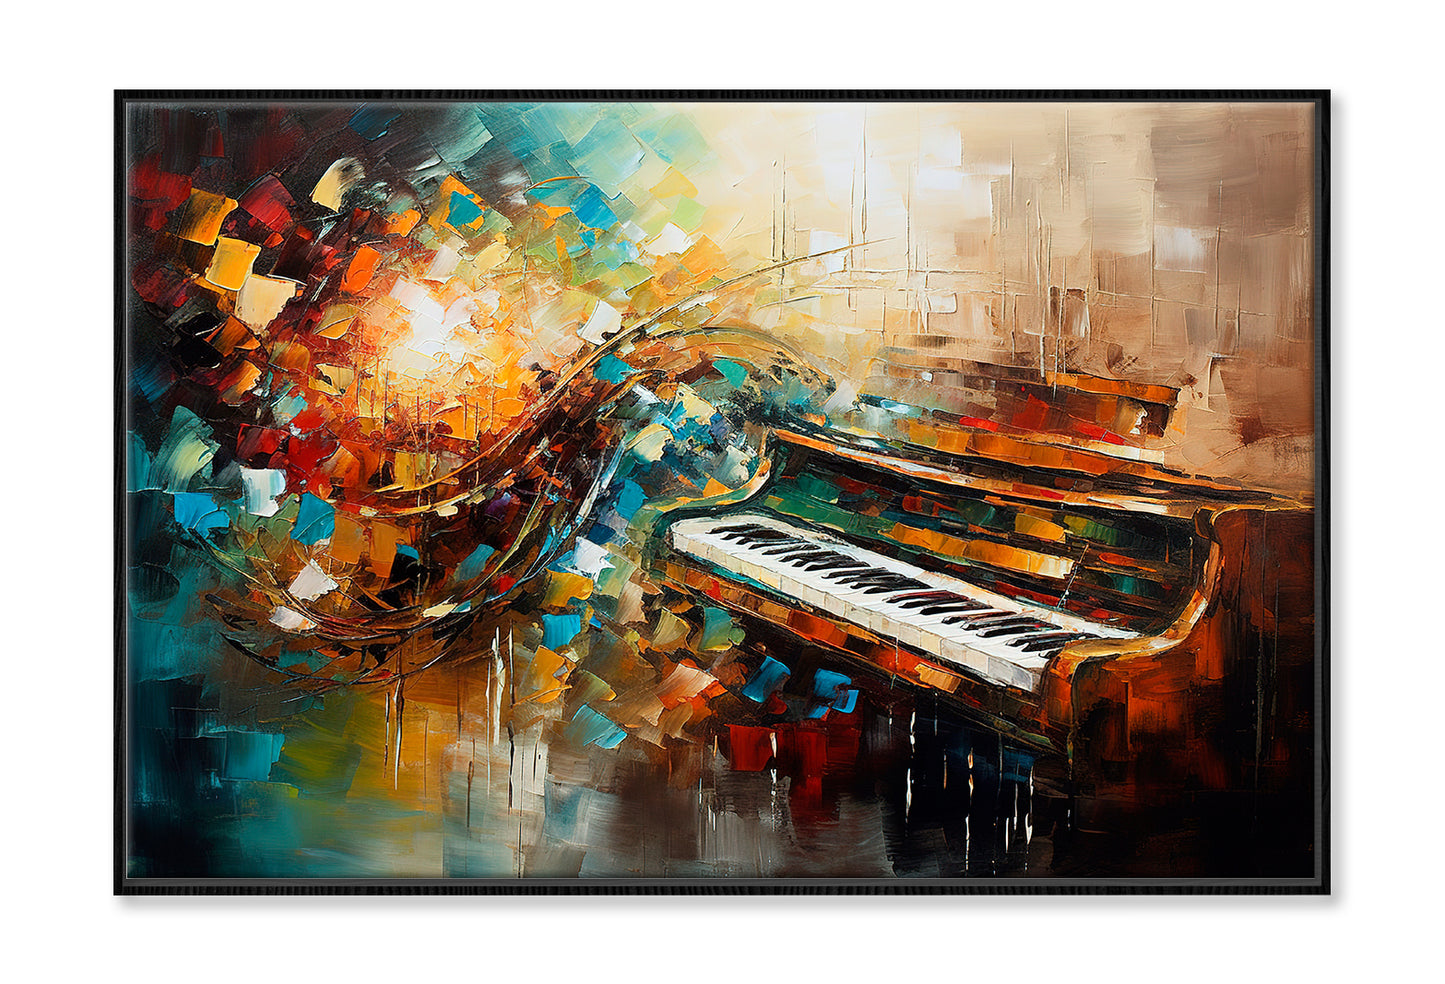 Piano Abstract Musical Oil Painting Wall Art Limited Edition High Quality Print Canvas Box Framed Black